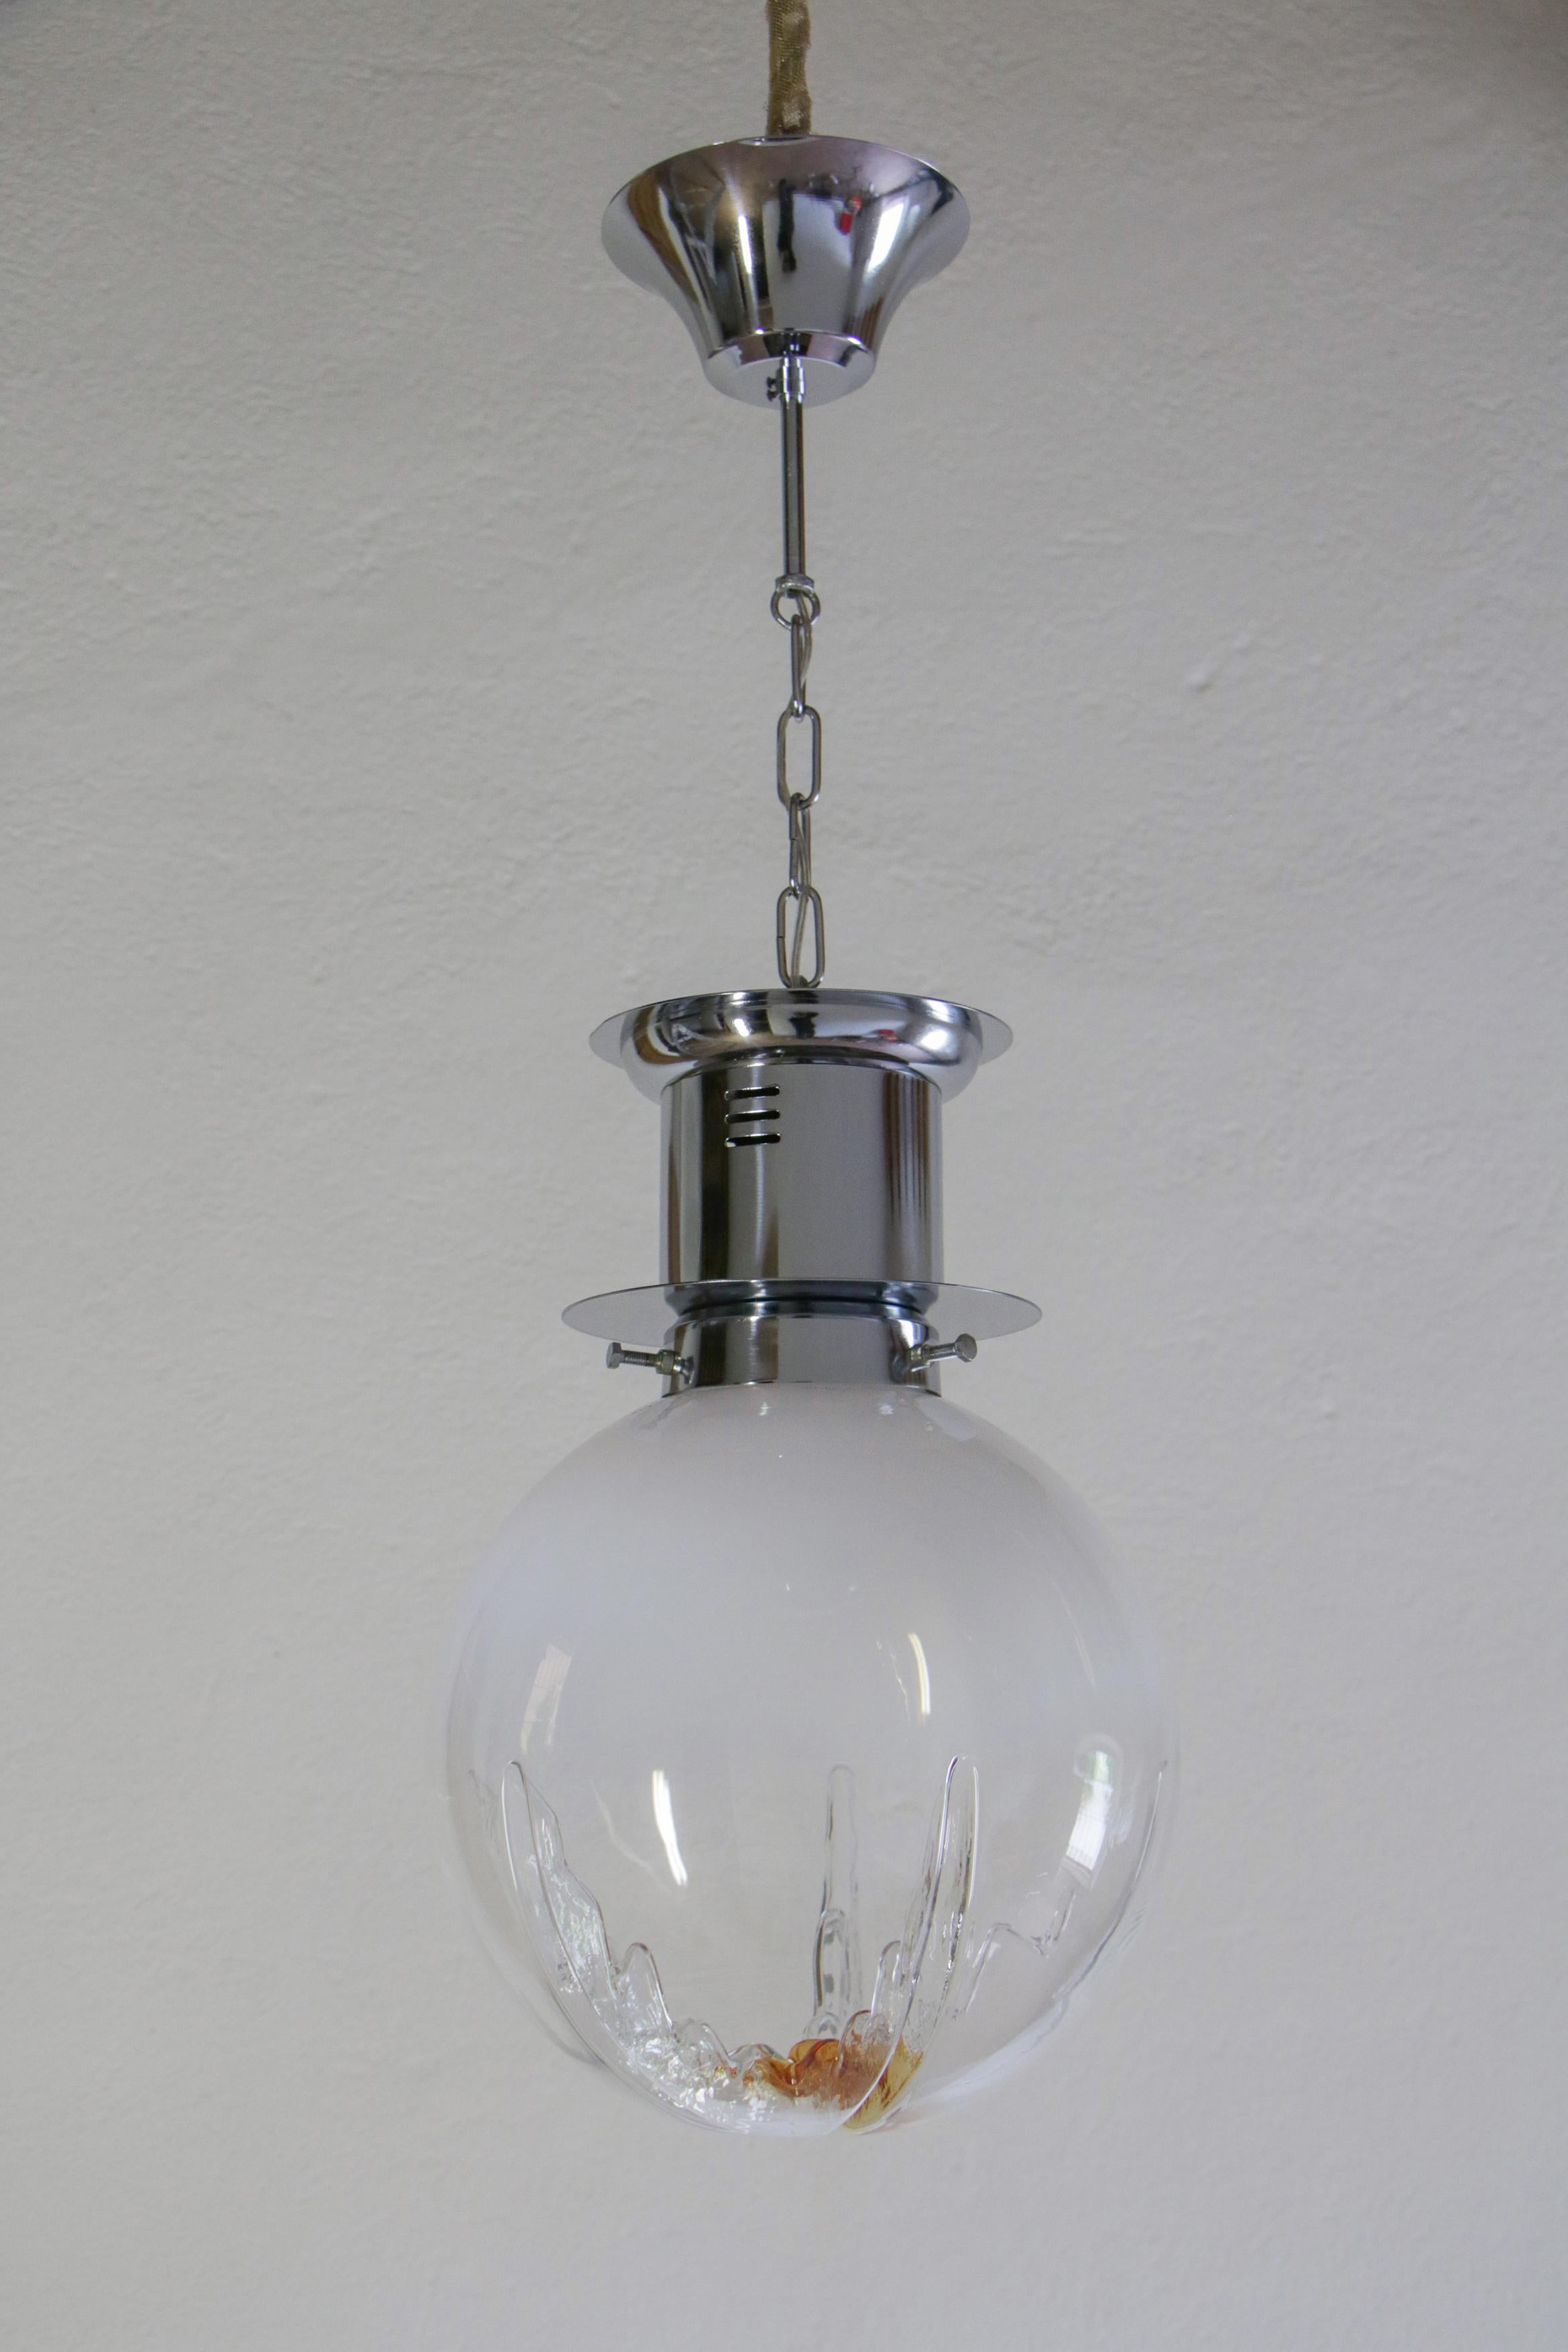 Italian Space Age Ball Pendant Ceiling Lamp Attributed to Mazzega, 1970s In Good Condition For Sale In Traversetolo, IT